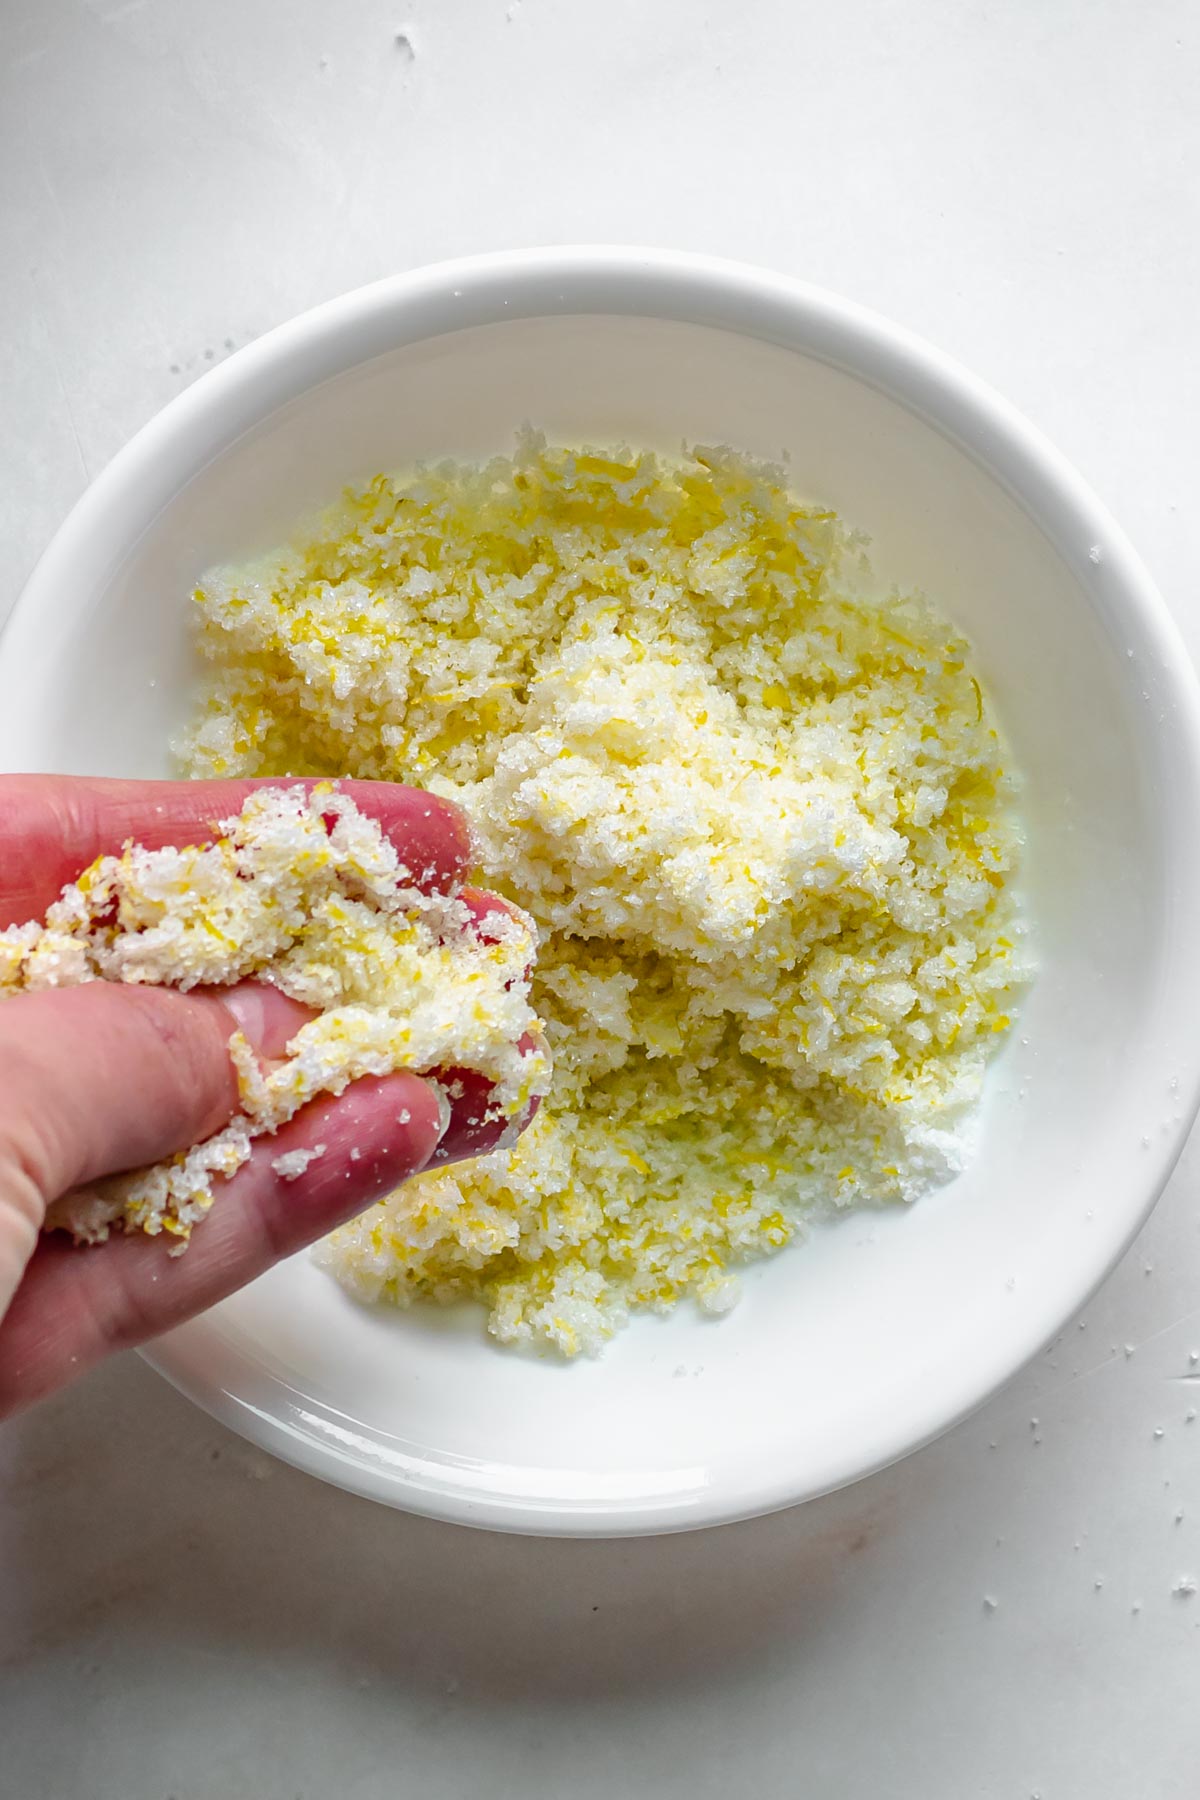 Lemon zest and sugar being rubbed together.